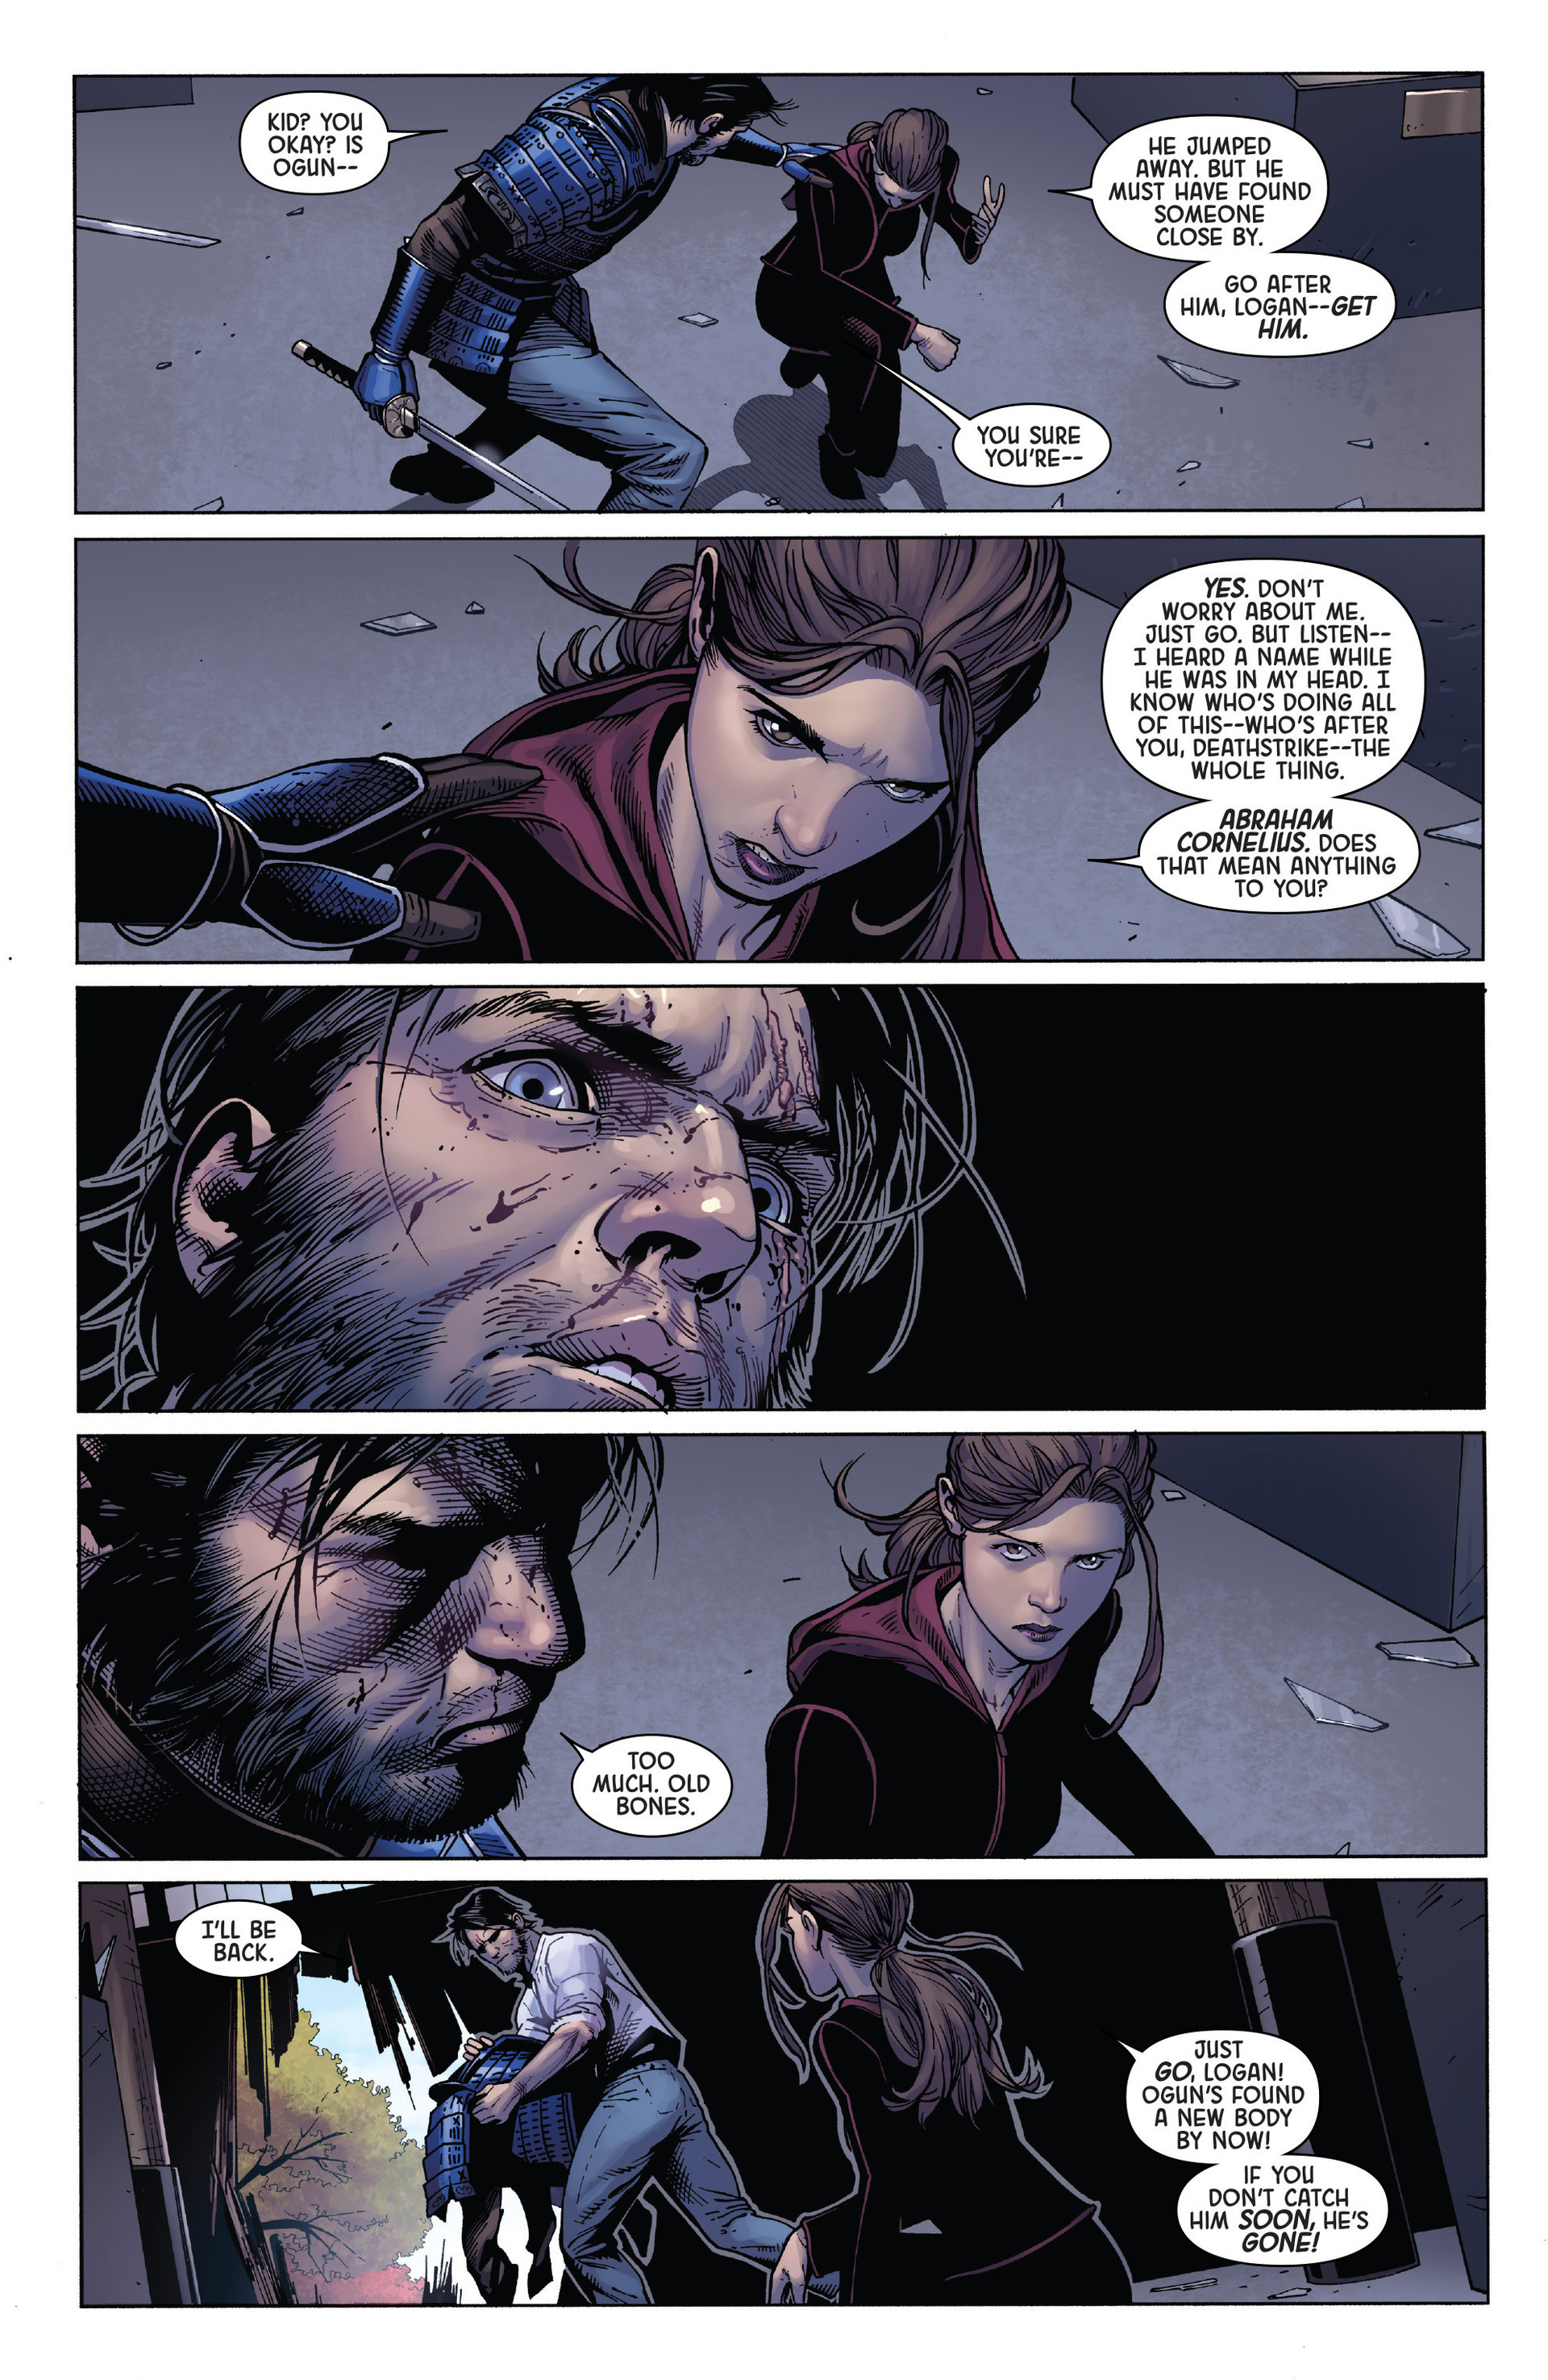 scans_daily | Death of Wolverine #3 & #4